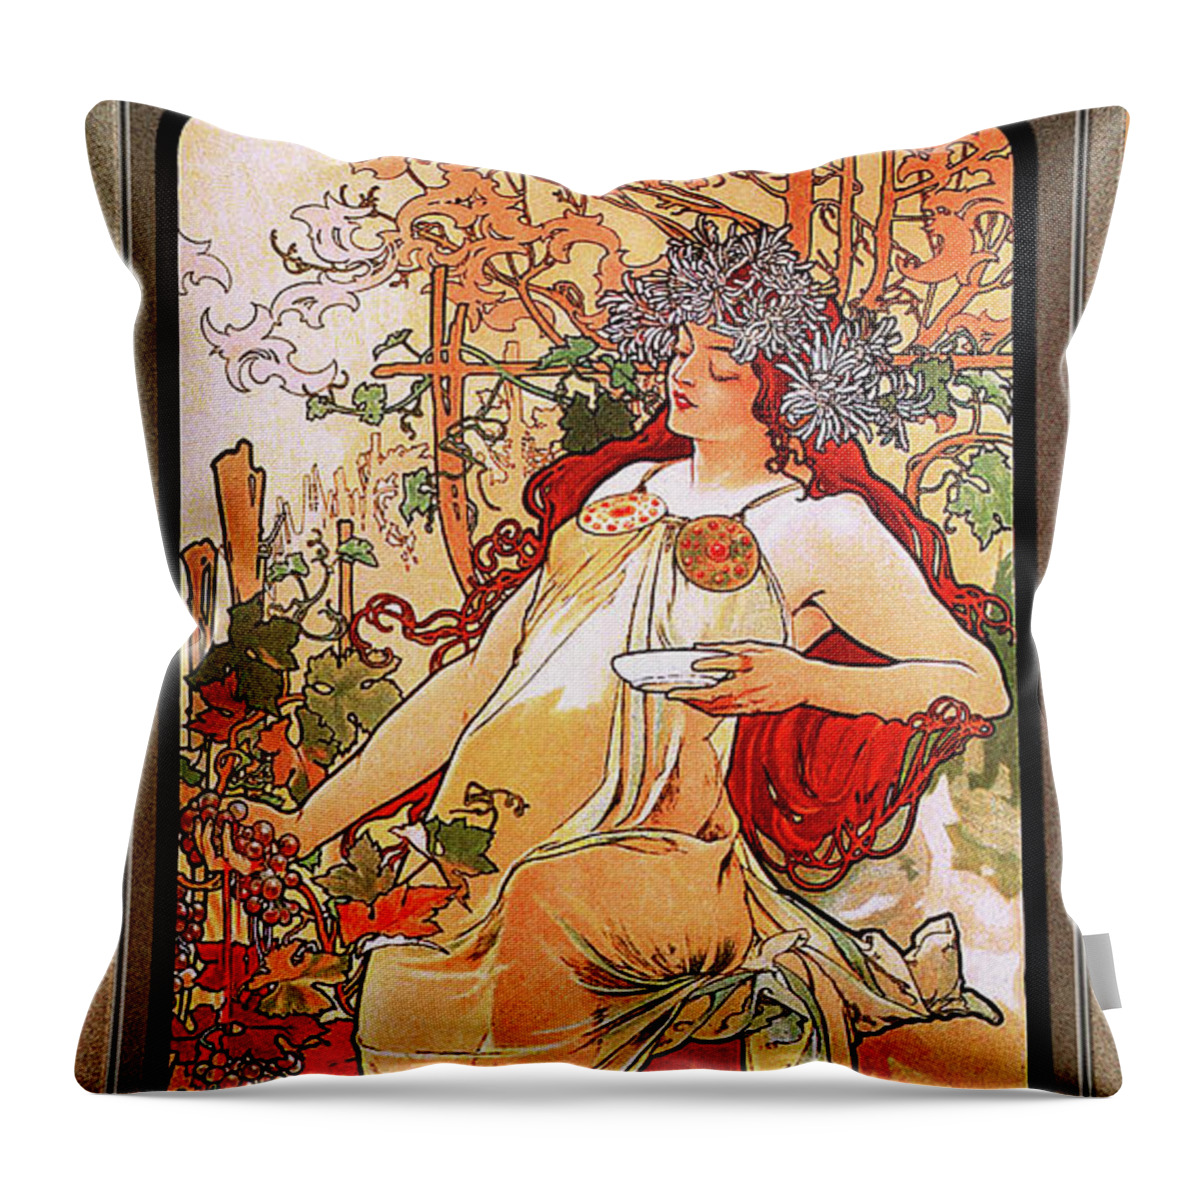 The Autumn Throw Pillow featuring the painting The Autumn by Alphonse Mucha by Rolando Burbon